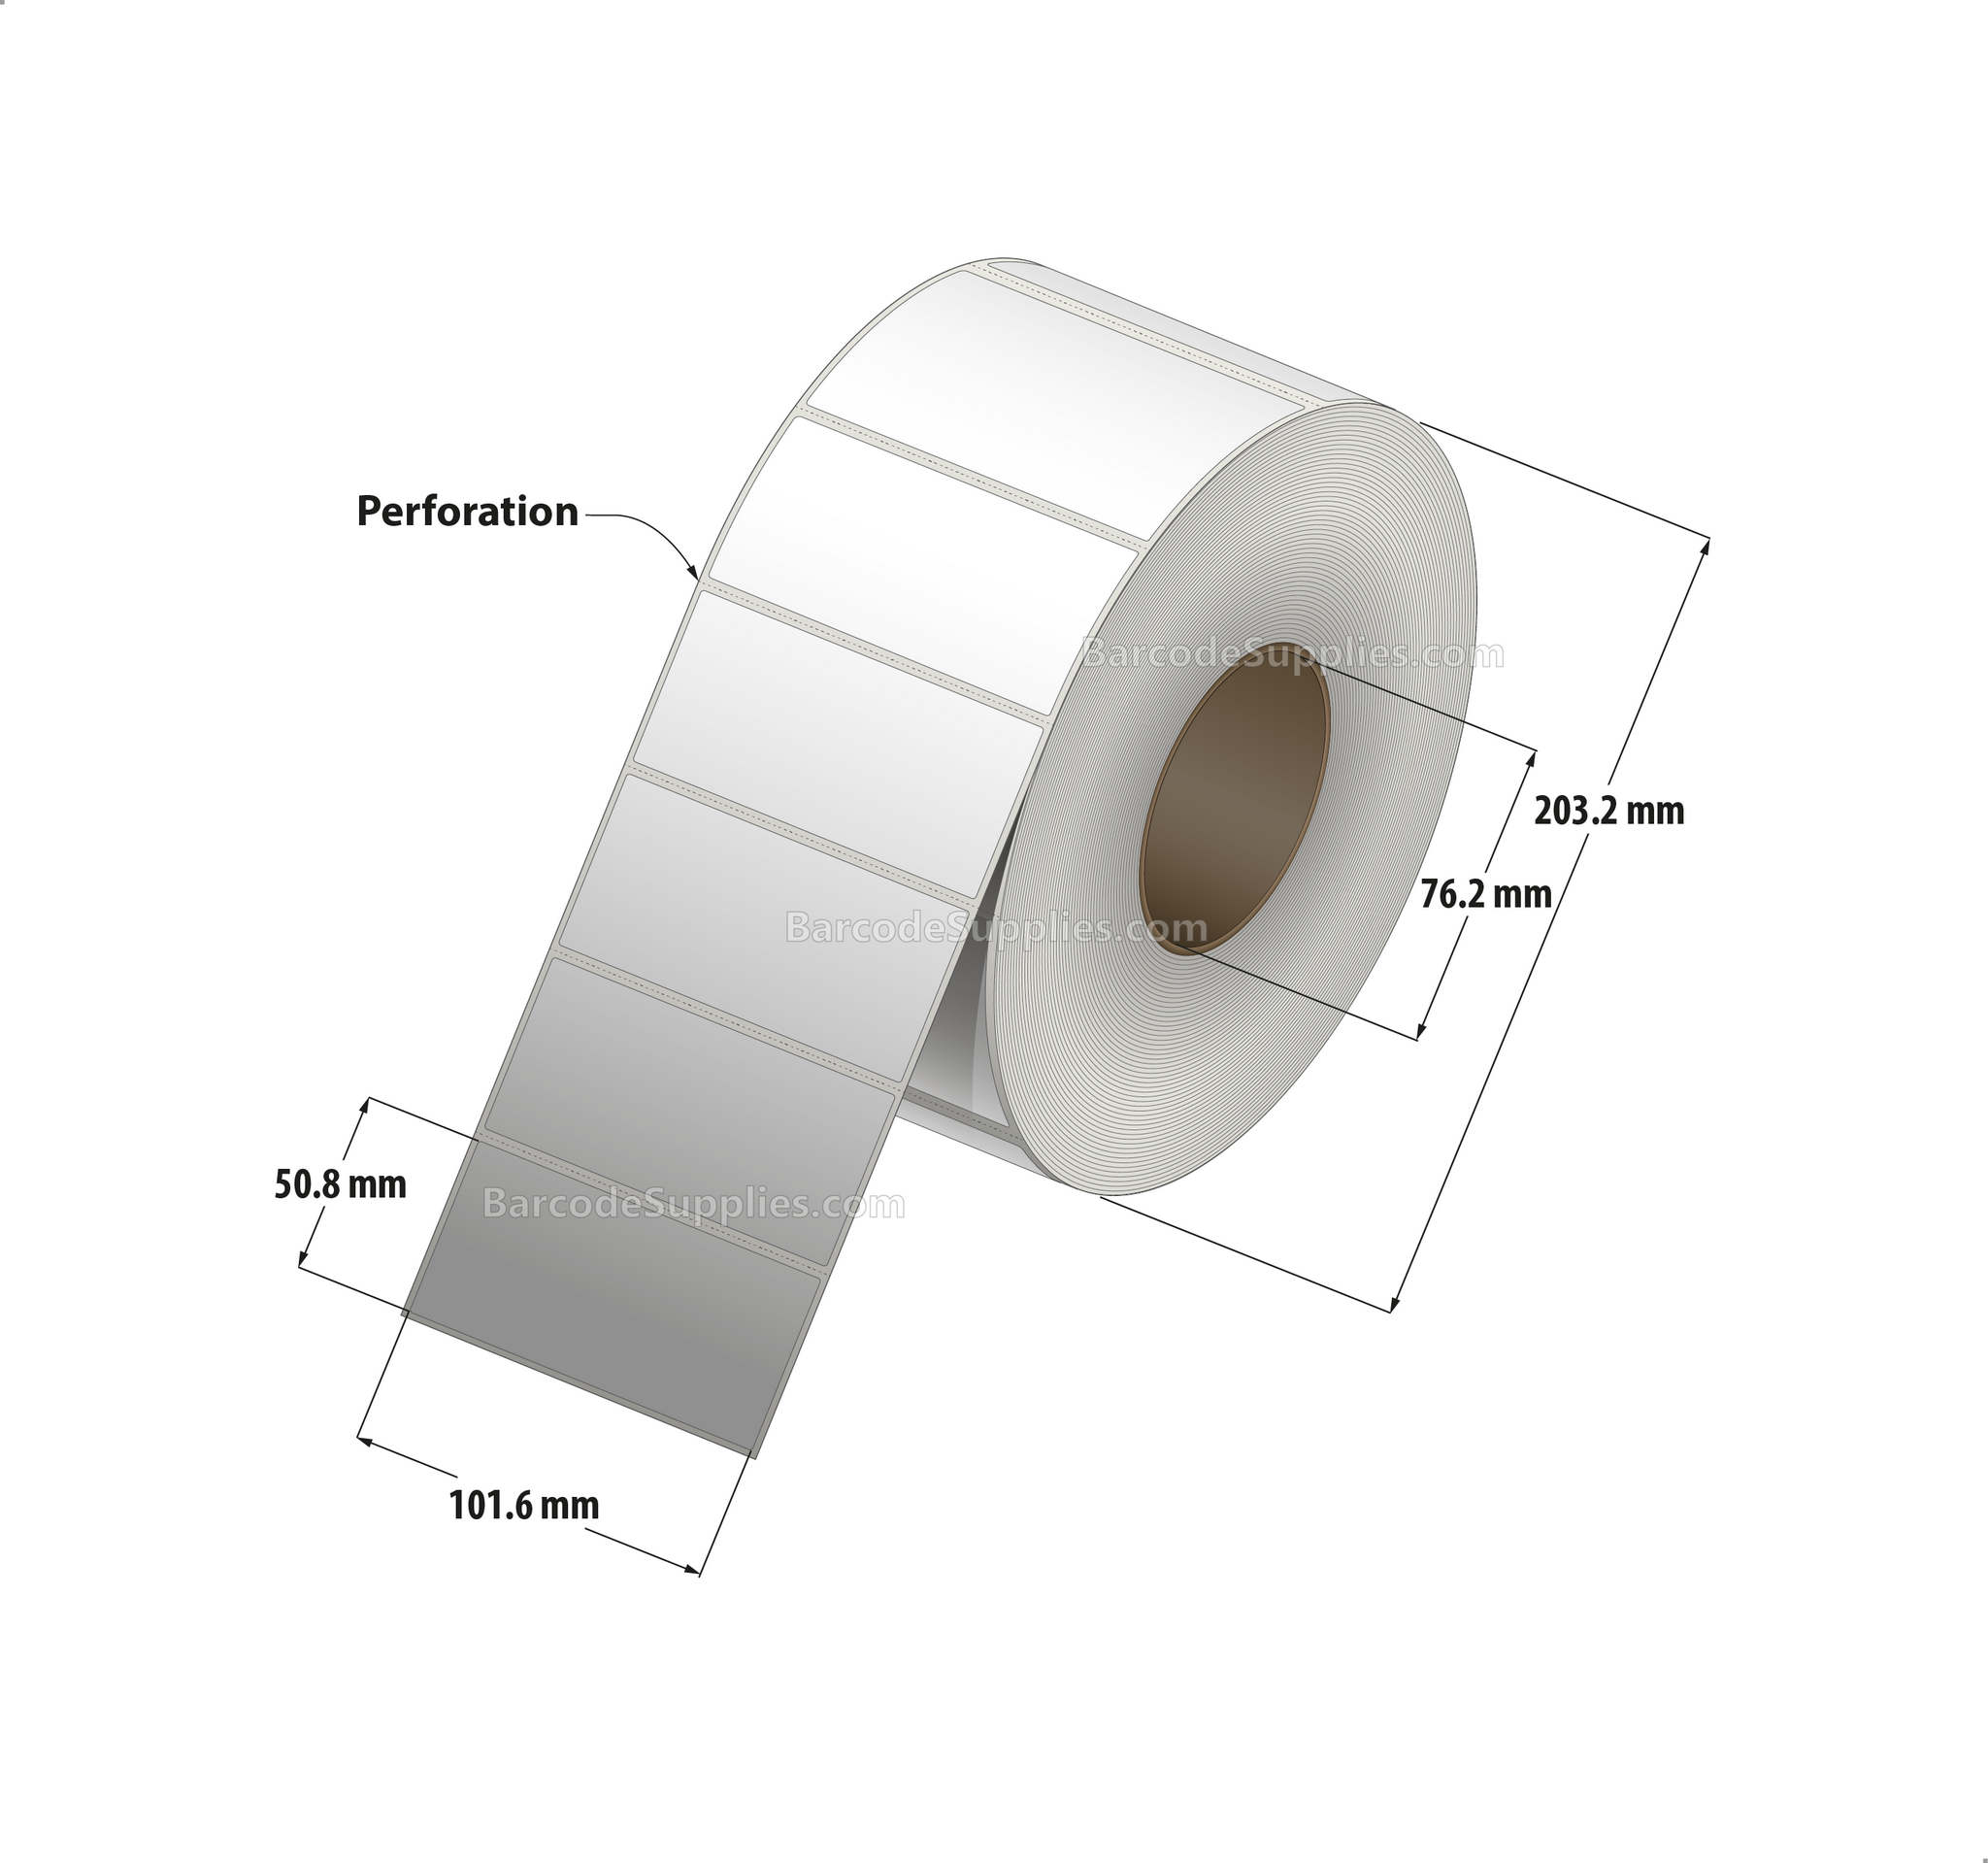 4 x 2 Direct Thermal White Labels With Acrylic Adhesive - Perforated - 2900 Labels Per Roll - Carton Of 4 Rolls - 11600 Labels Total - MPN: RD-4-2-2900-3 - BarcodeSource, Inc.